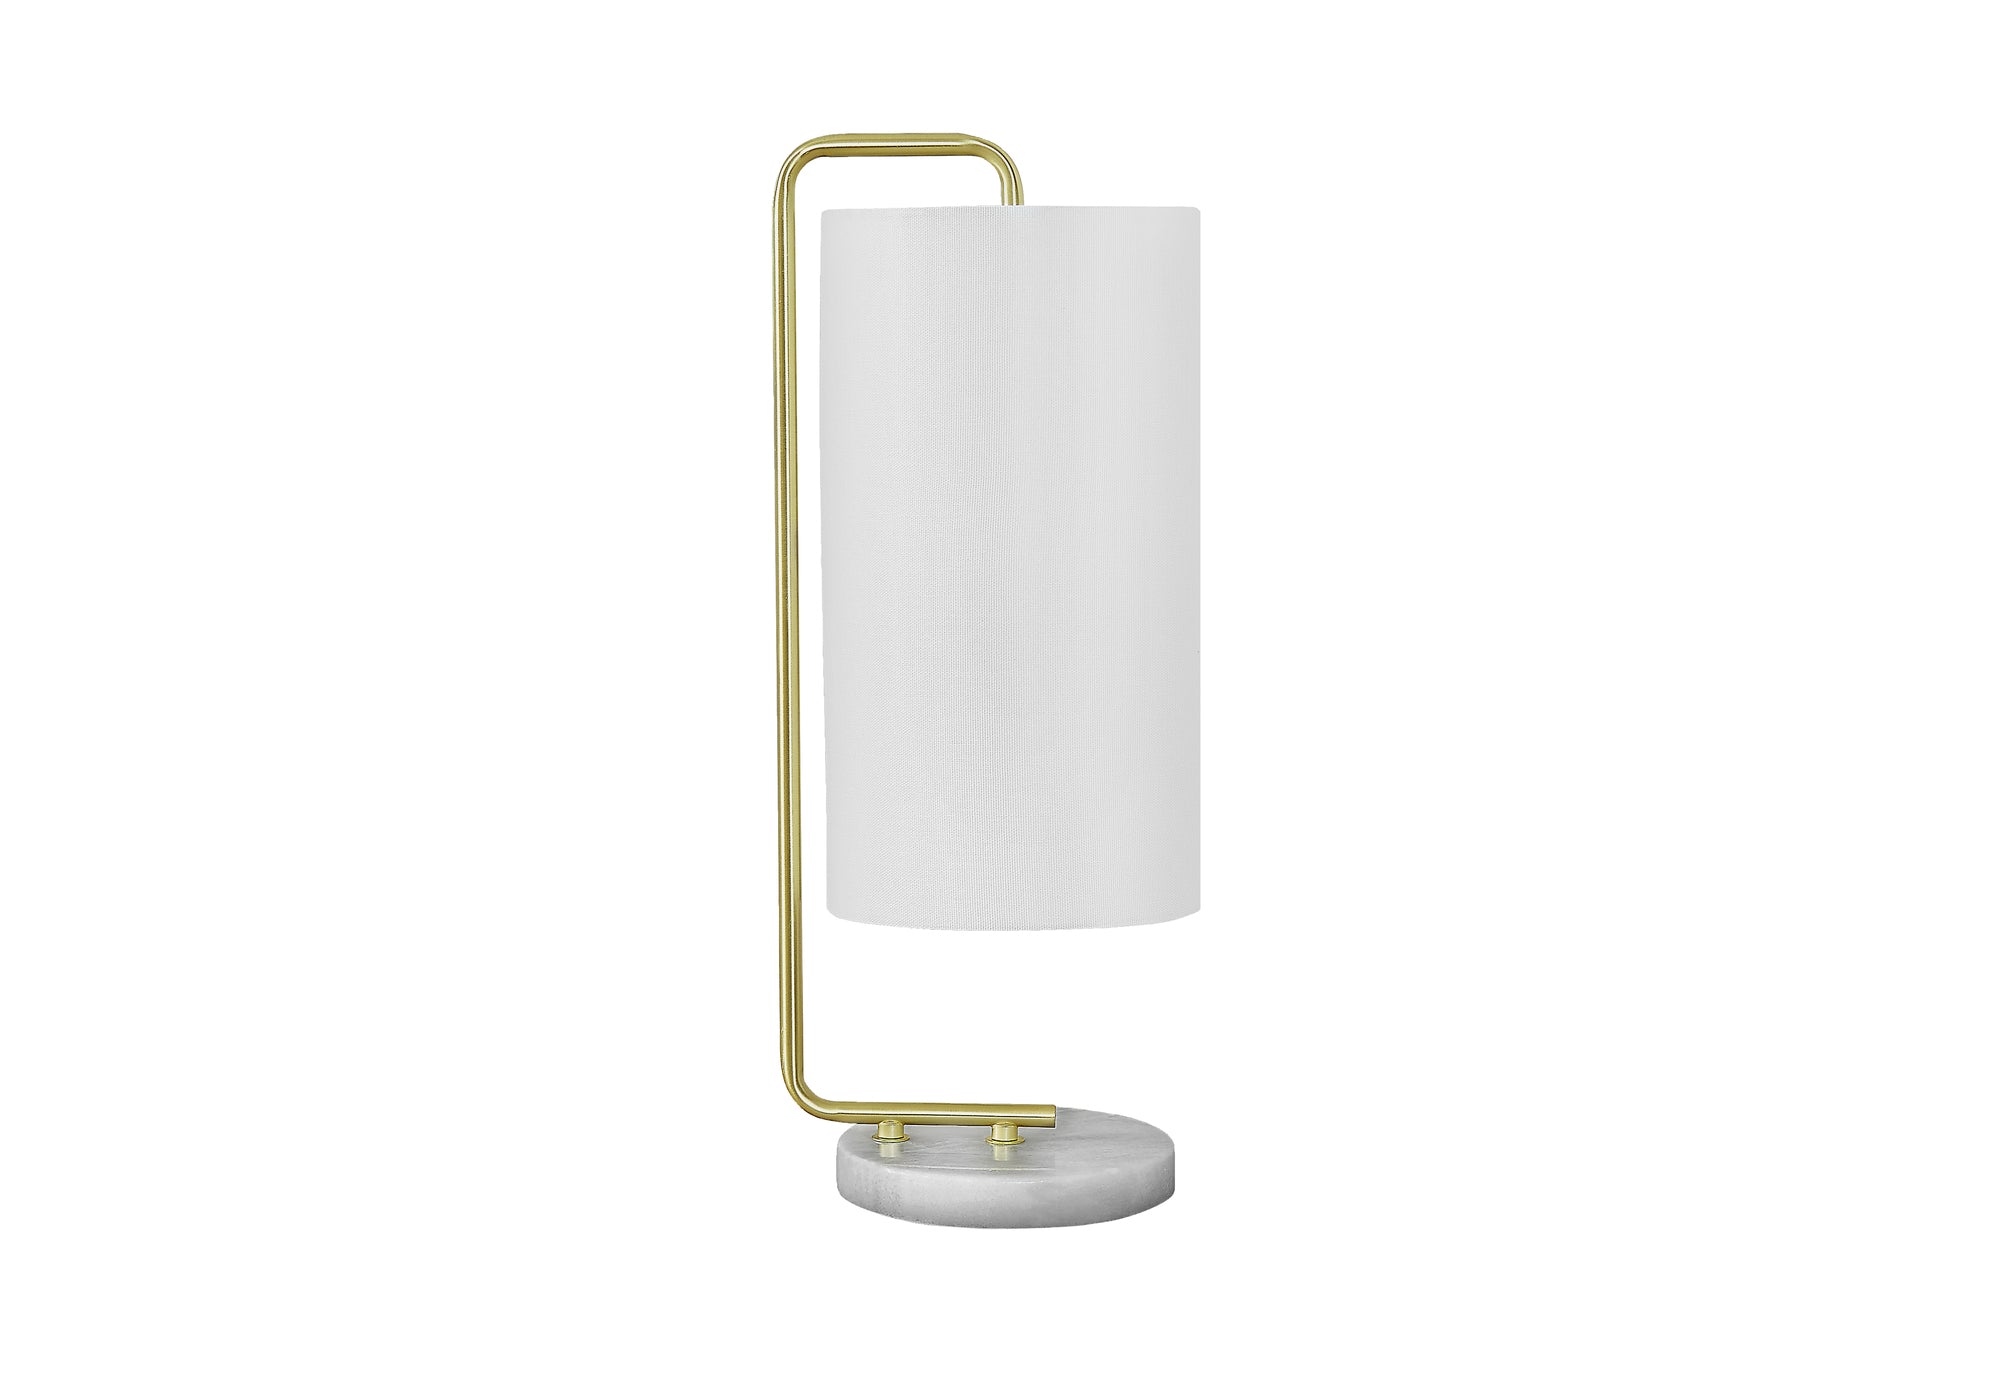 MN-179636    Lighting, 20"H, Table Lamp, White Marble, Ivory / Cream Shade, Contemporary